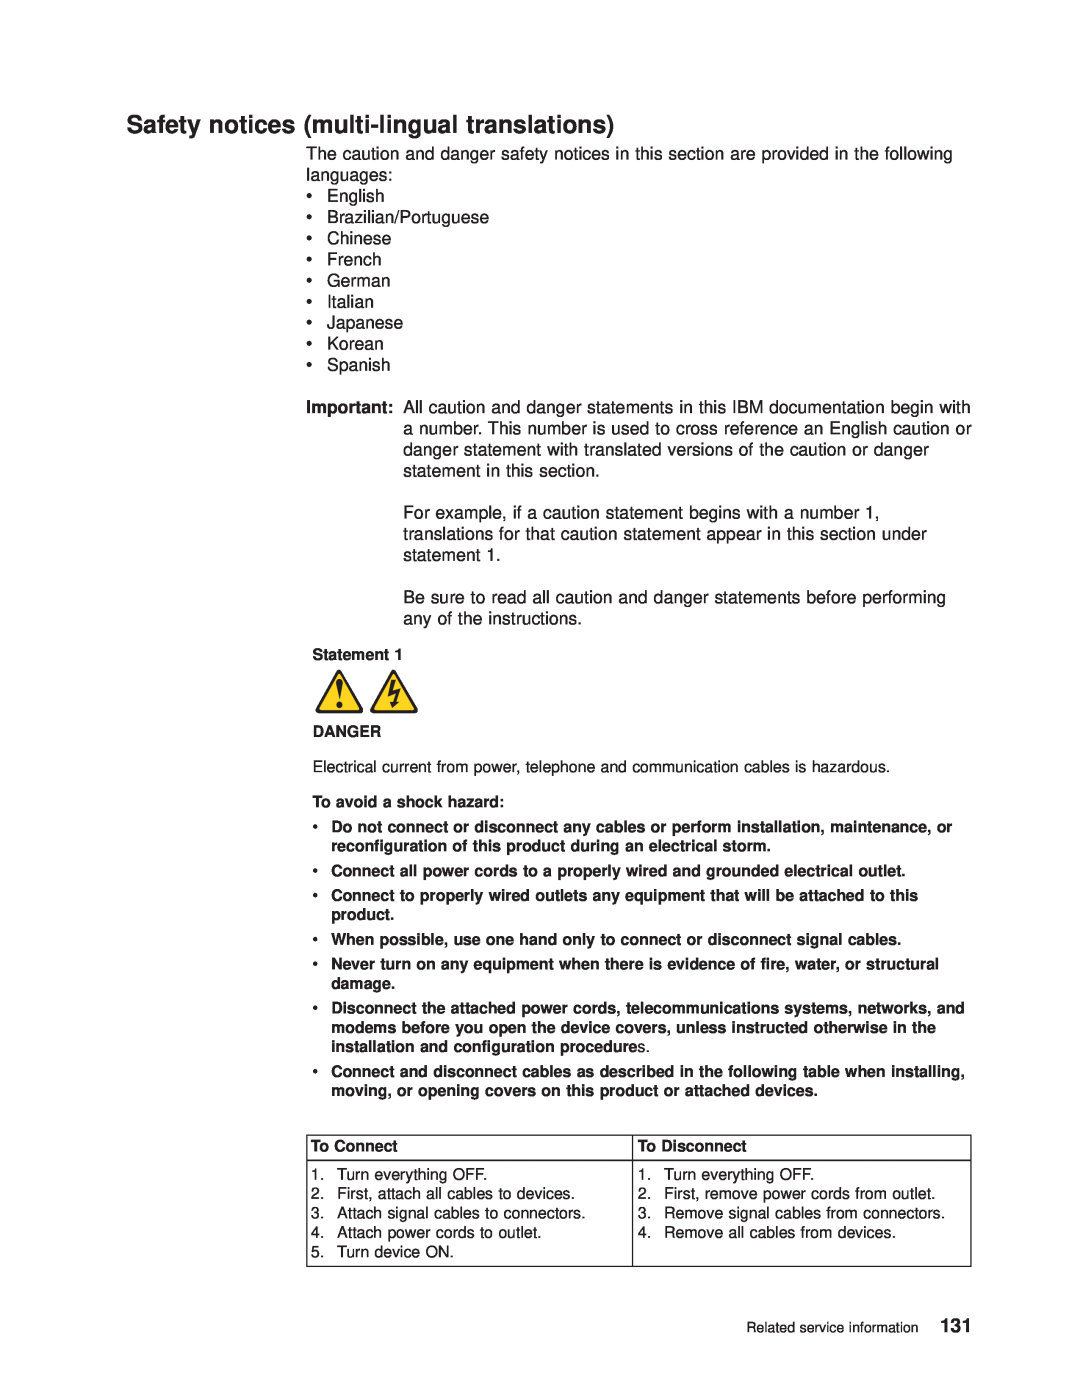 IBM 8682 manual Safety notices multi-lingual translations 